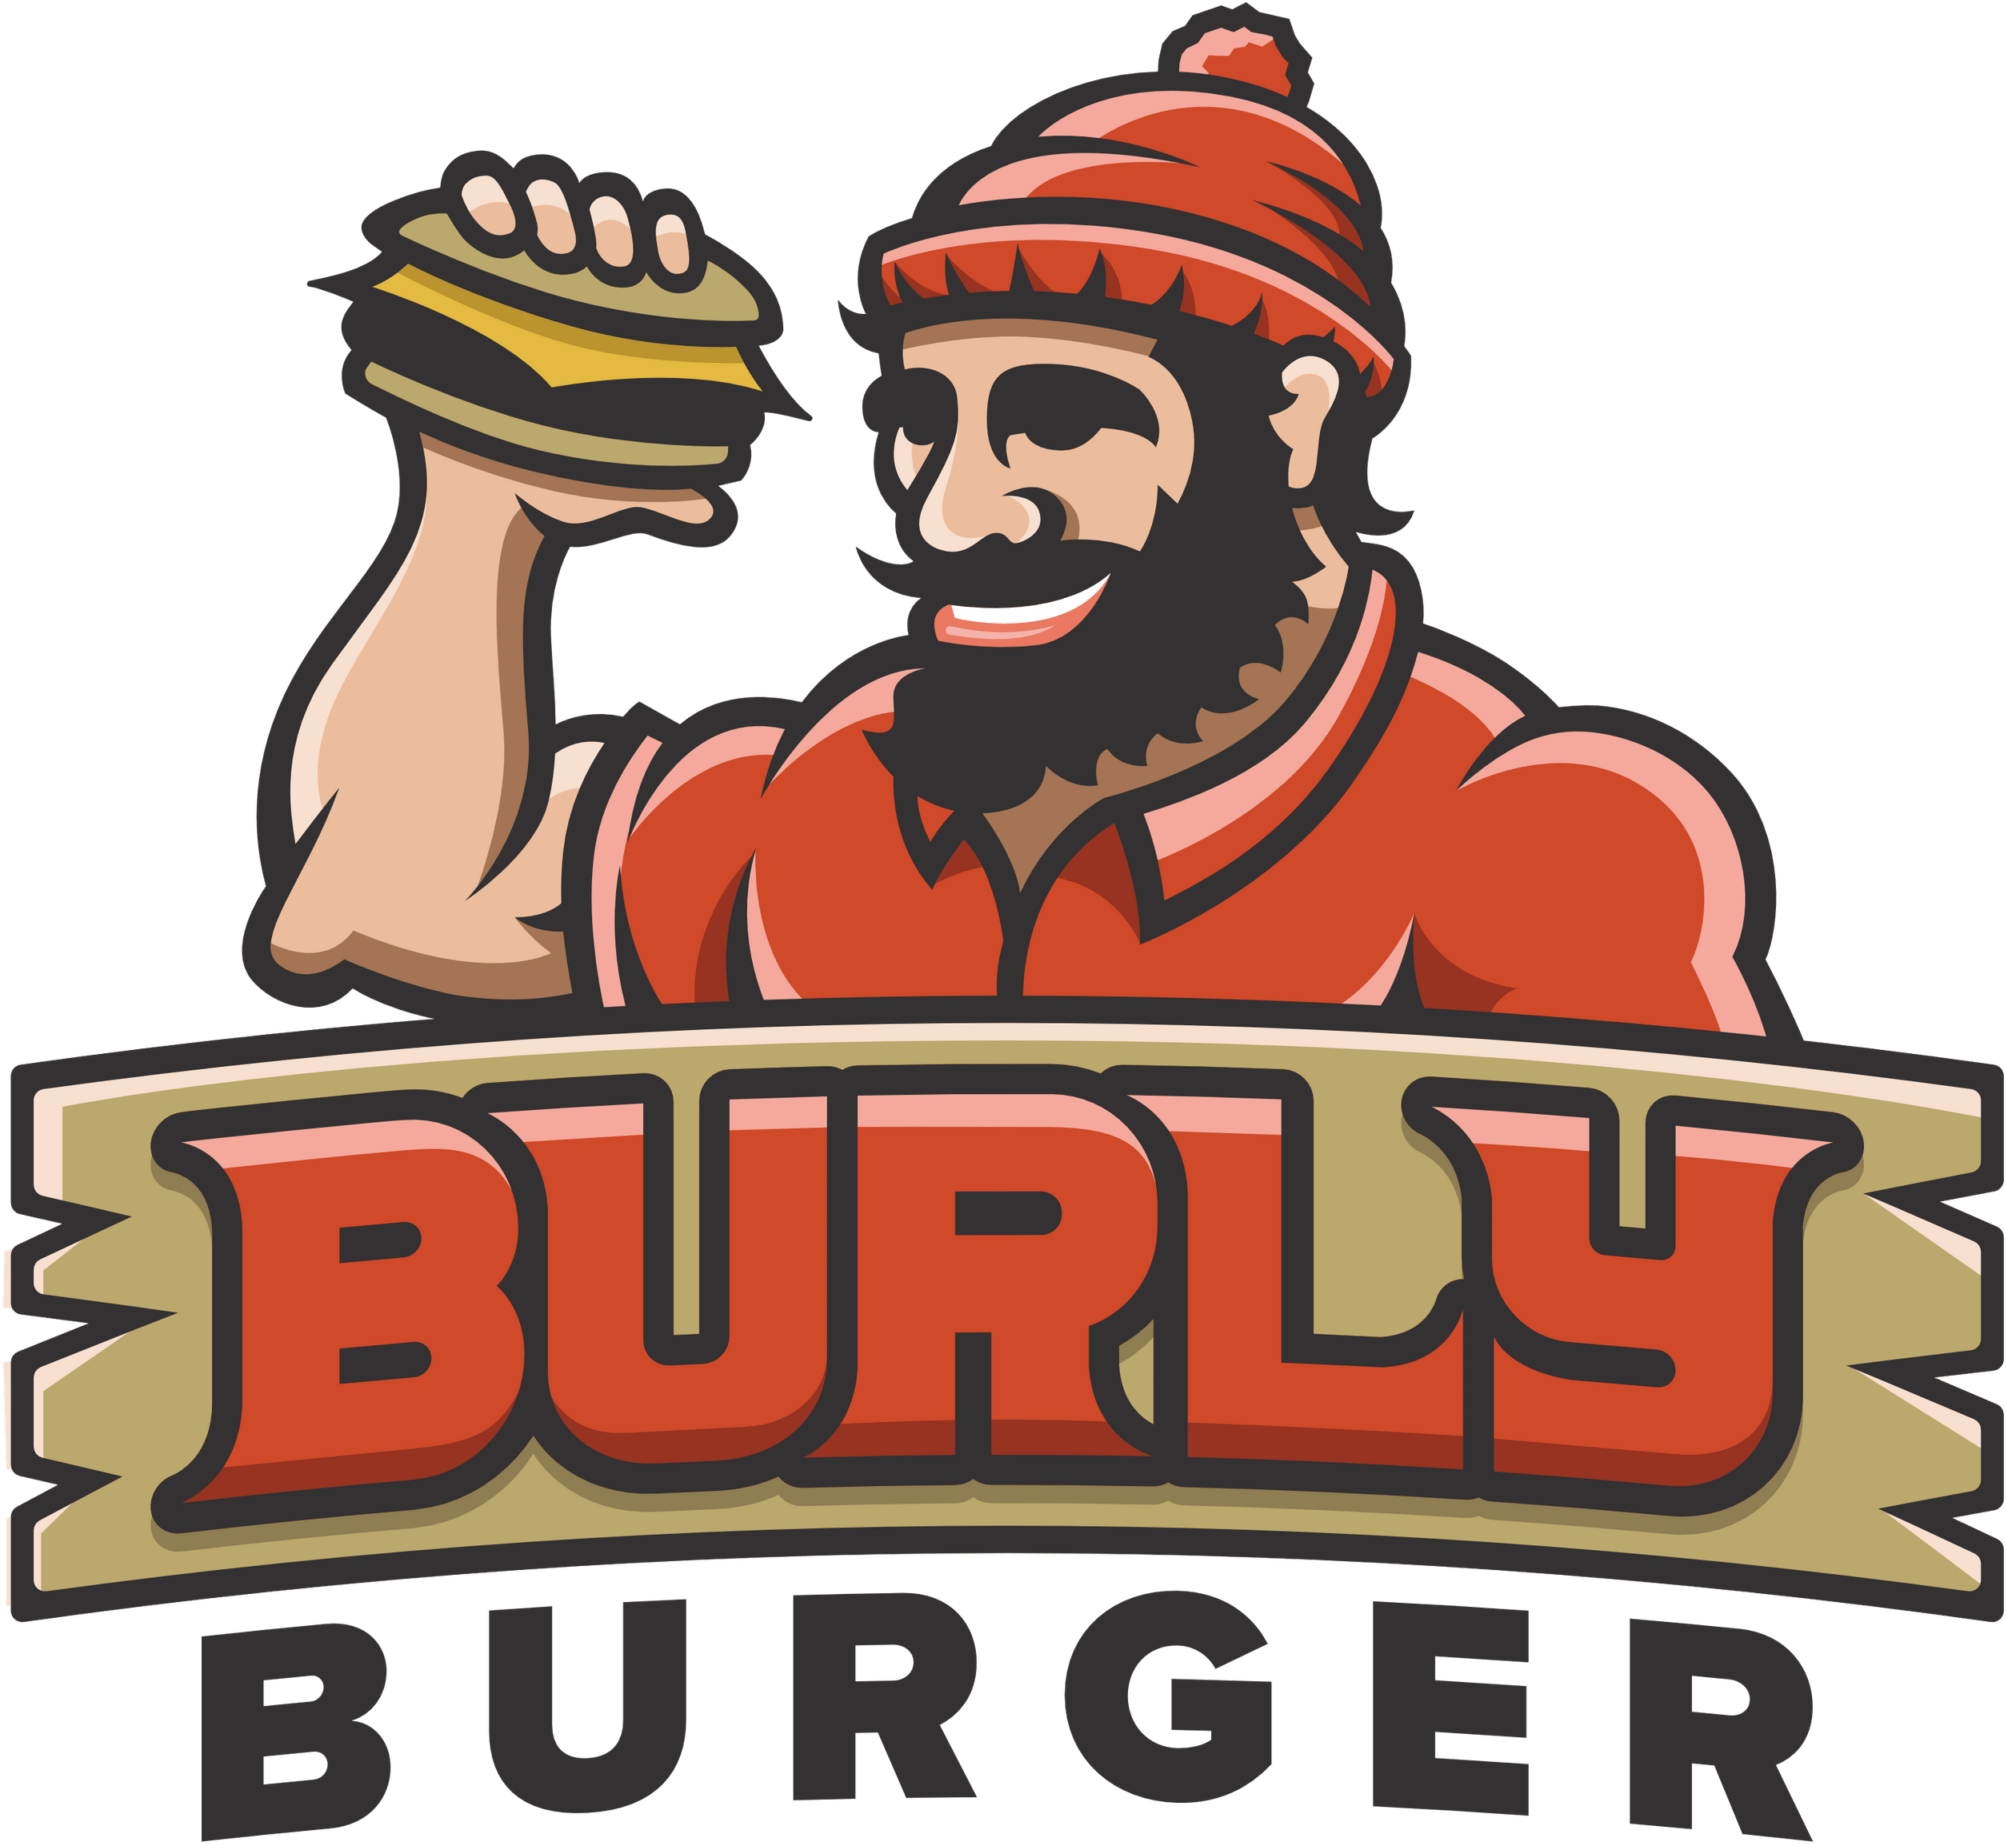 $5 Off Any Purchase Of $20 Or More At Burly Burger - Burly Burger Challenge (2048x2048)